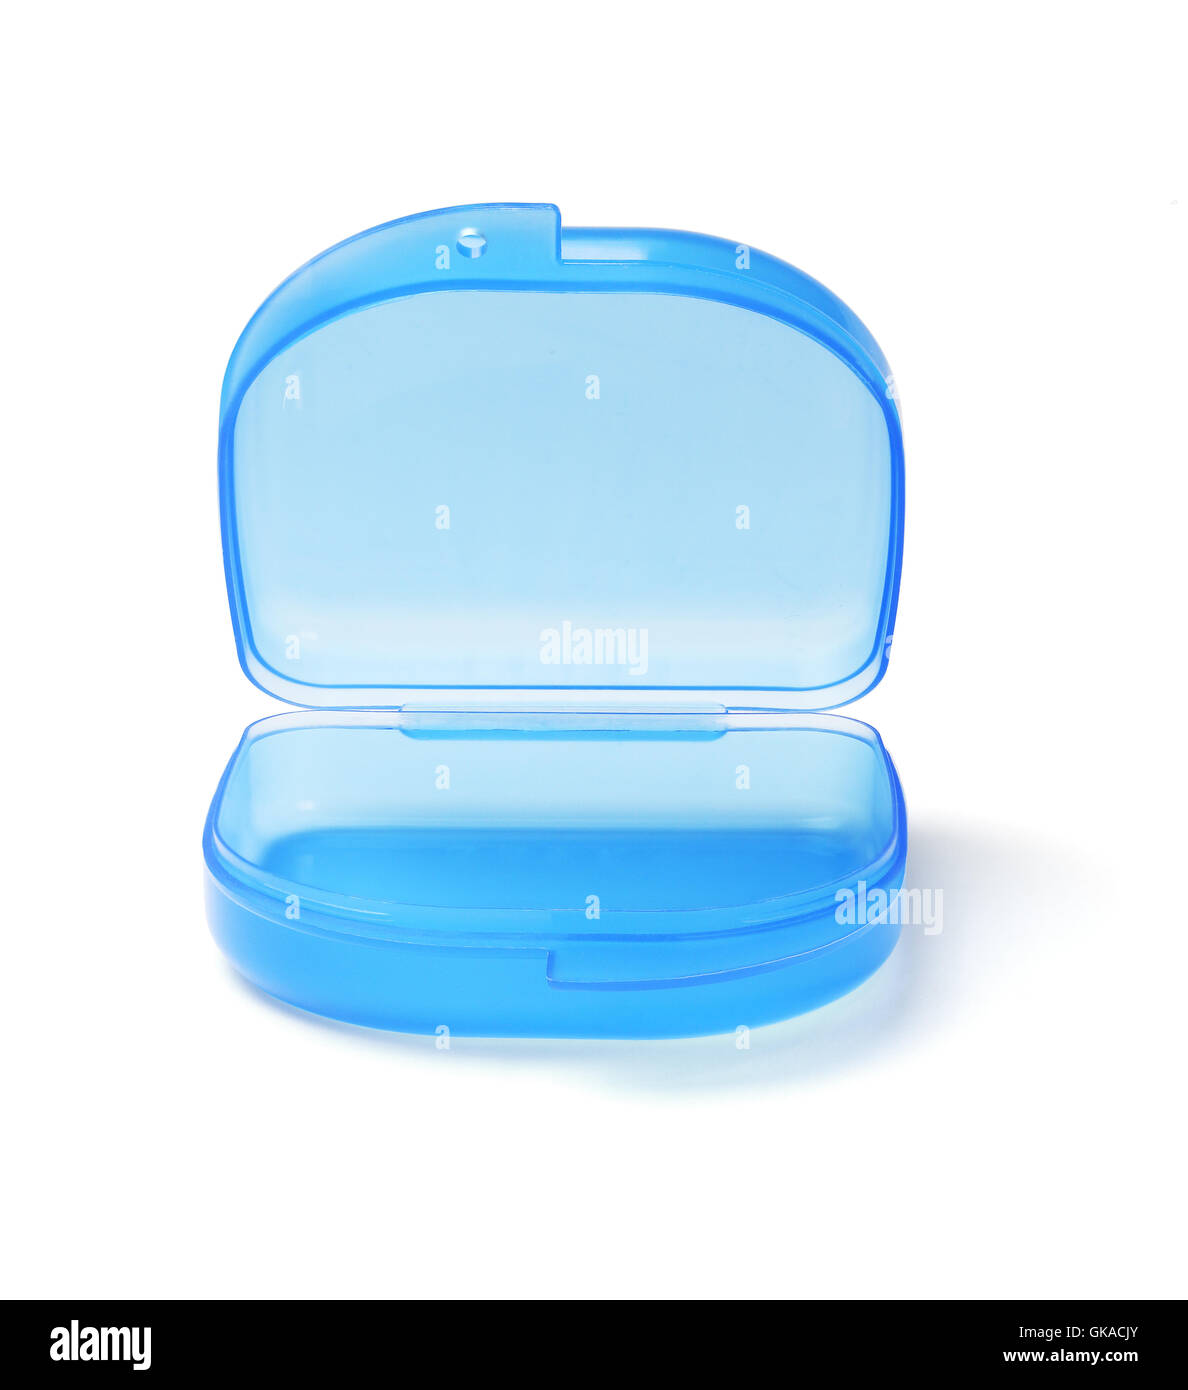 Plastic Storage Container For Small Object on White Background Stock Photo